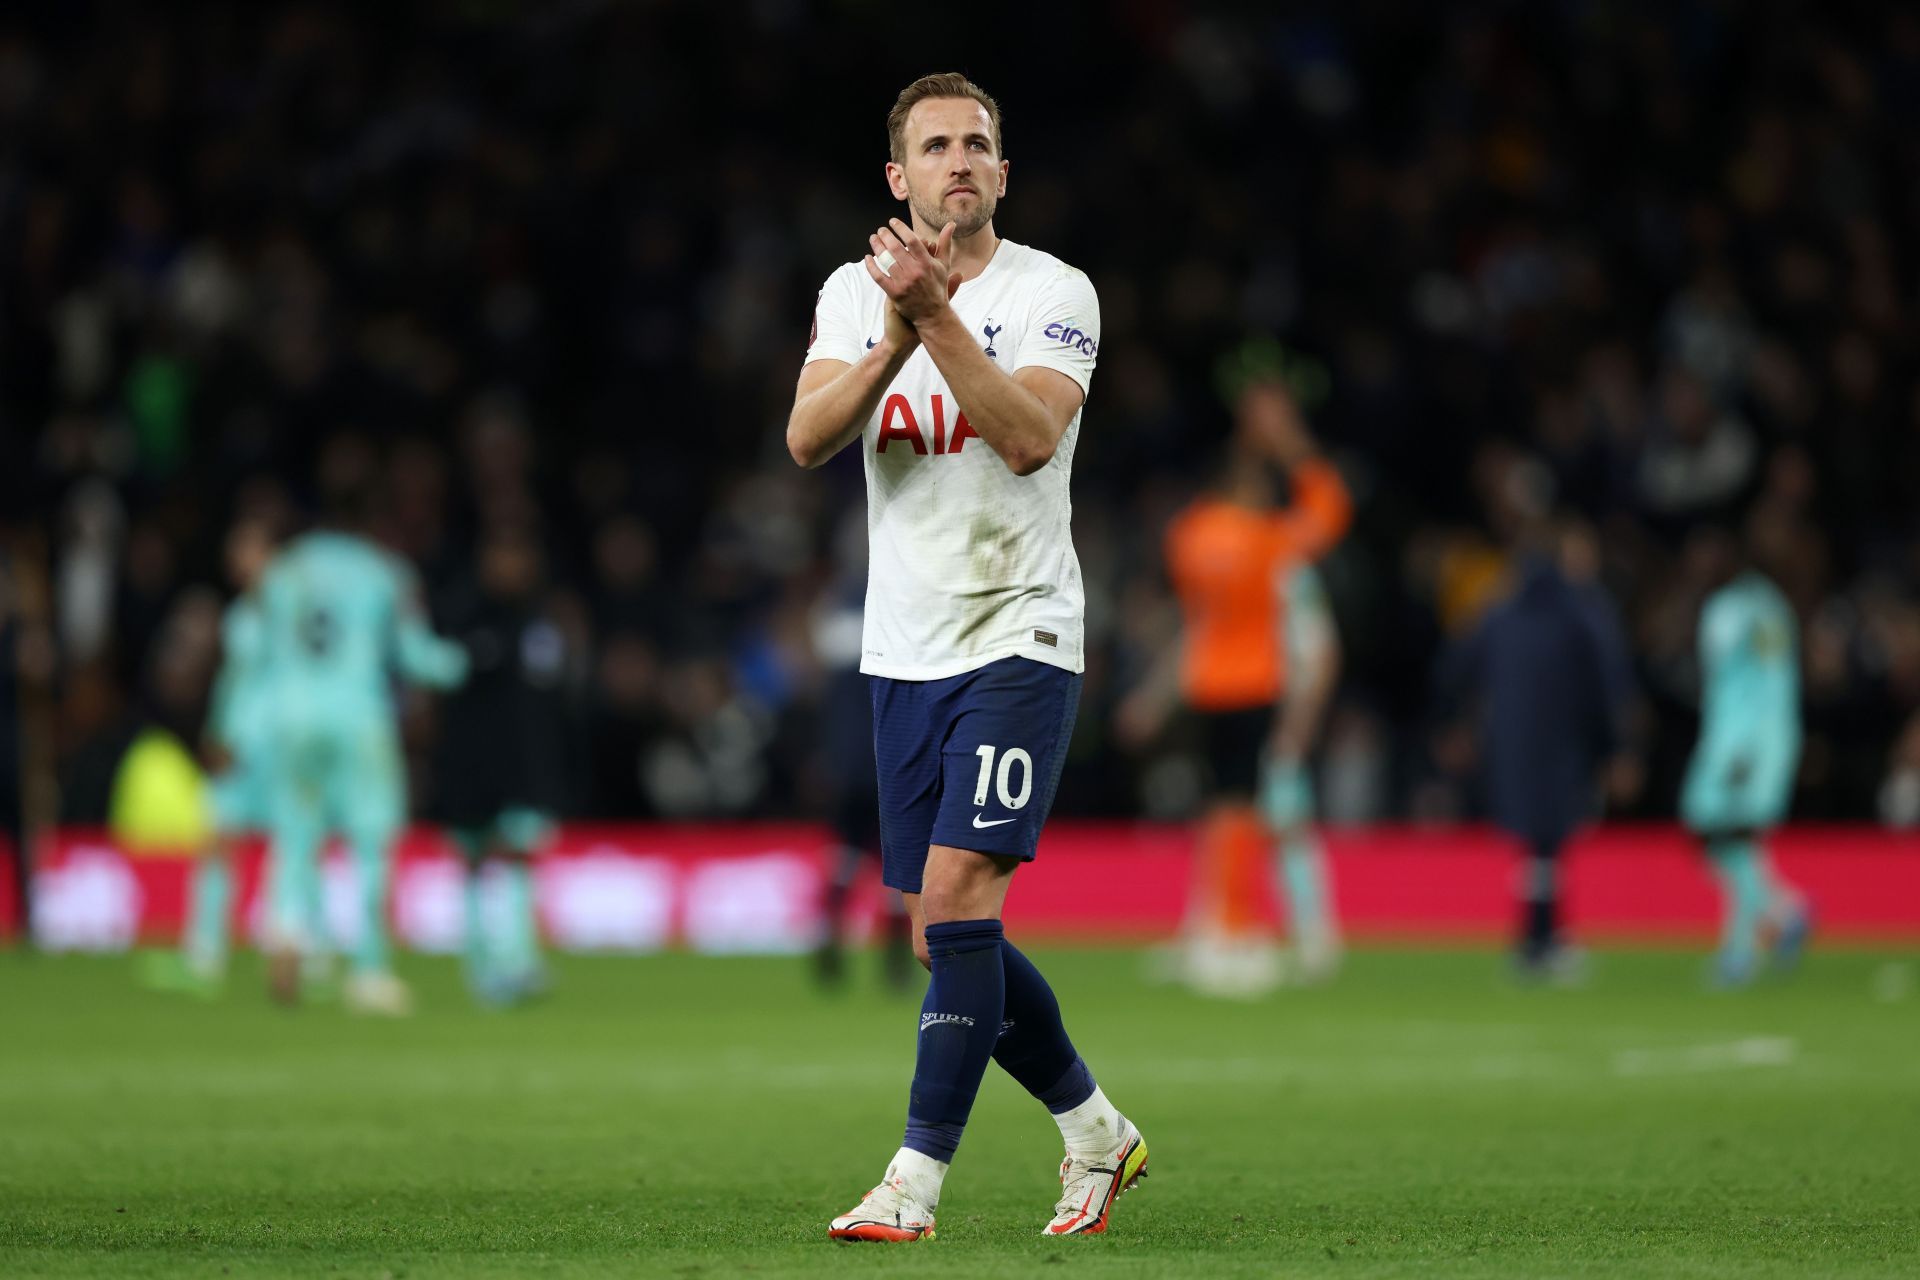 Harry Kane is one of the best strikers in the Premier League.